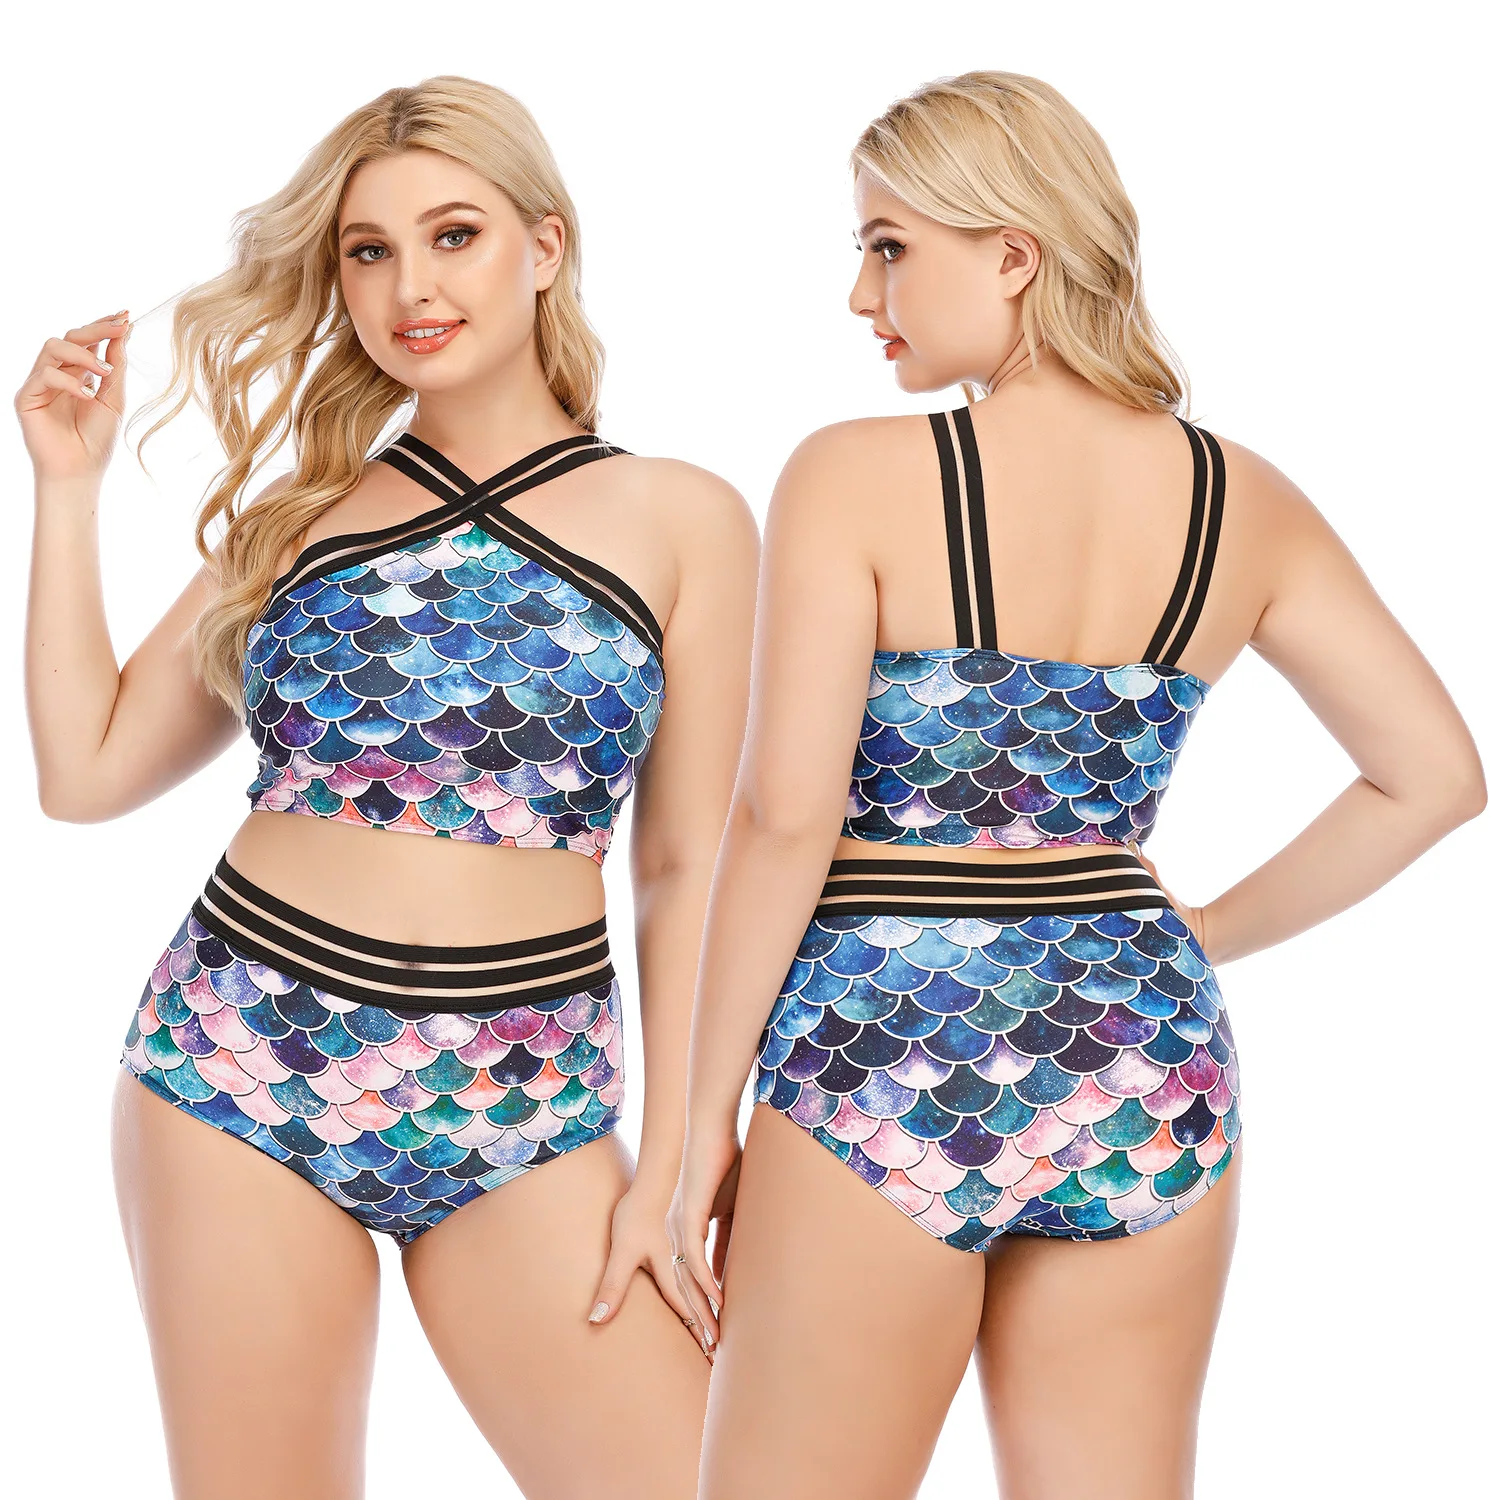 https://ae01.alicdn.com/kf/S5e4ea8d00fe24662a19c3b5d9fac11c1V/Fish-Scale-Print-Separate-Swimsuit-Women-2022-New-Two-piece-Swimming-Suits-BBW-Plus-Size-Swimwear.jpg